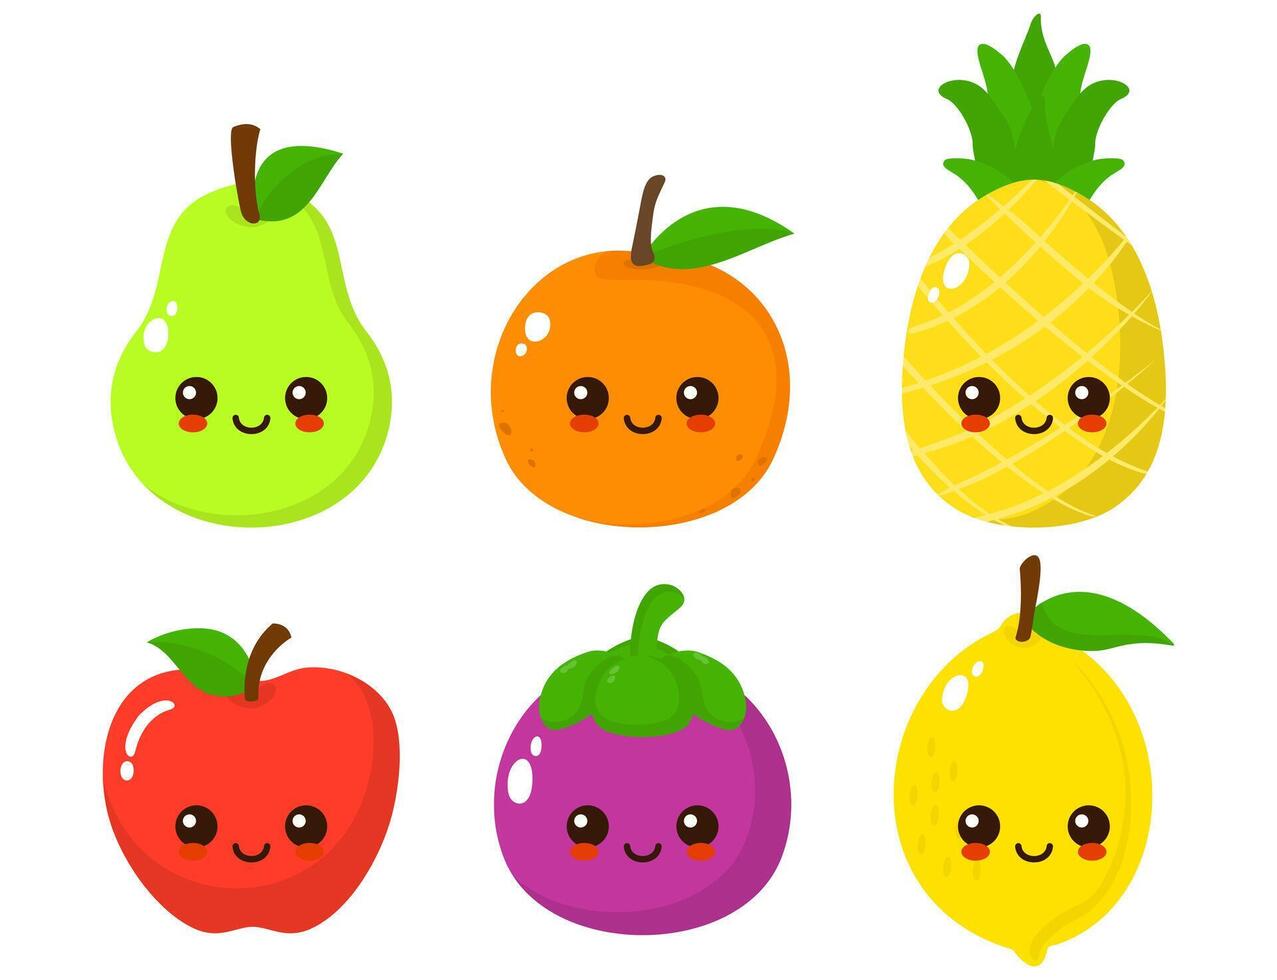 Cute happy smiling fruit face set flat cartoon character illustration collection vector